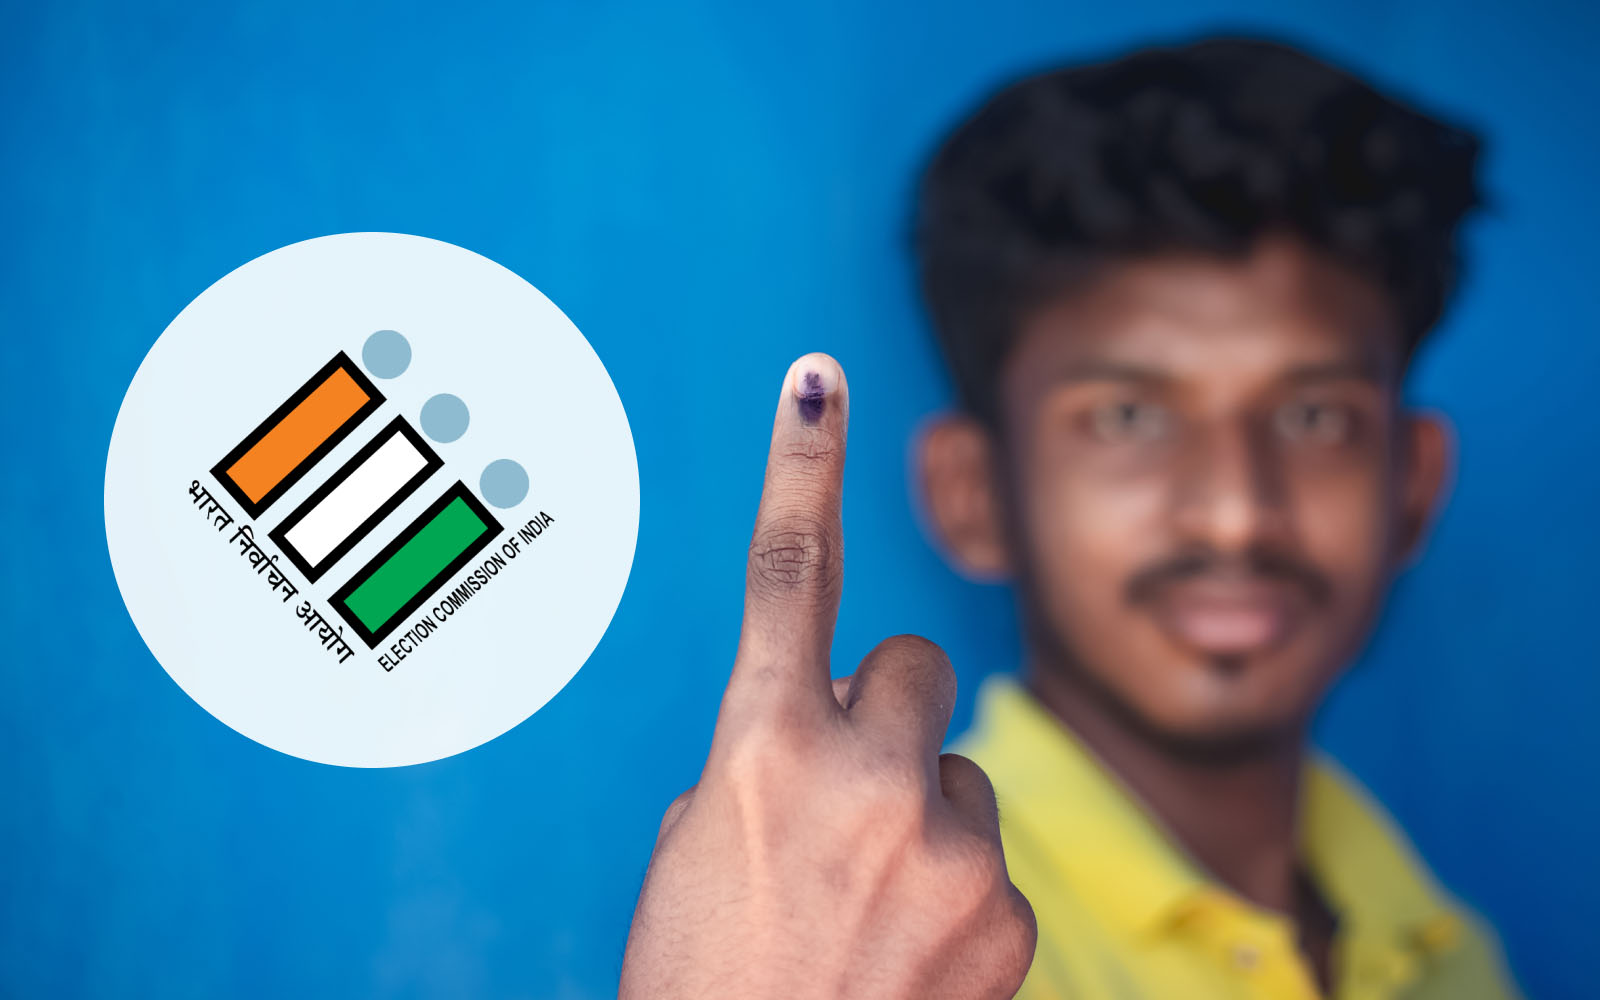 Election Commission of India: Know About Election Laws & Polling